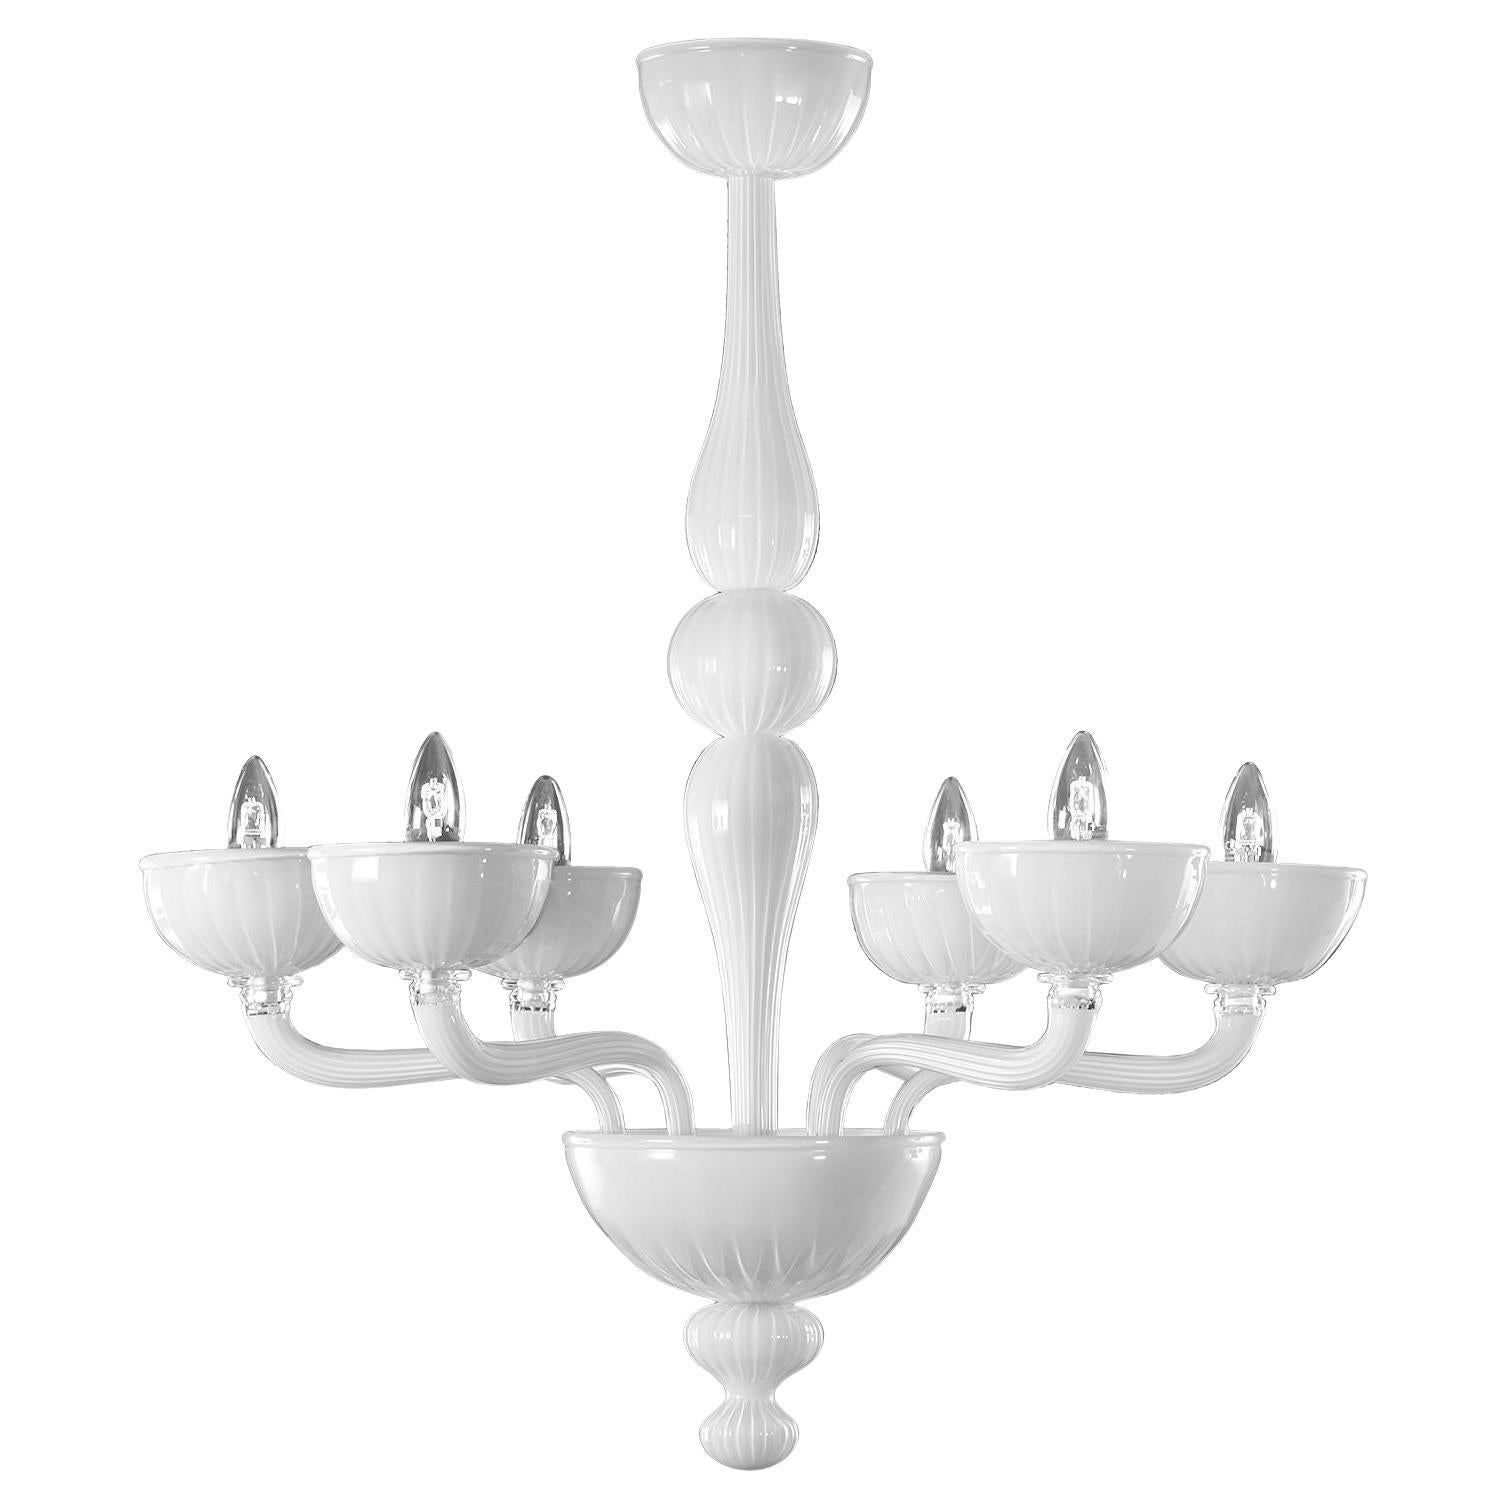 Rigadin Chandelier 6 Arms White Encased Murano Glass Edgar by Multiforme For Sale